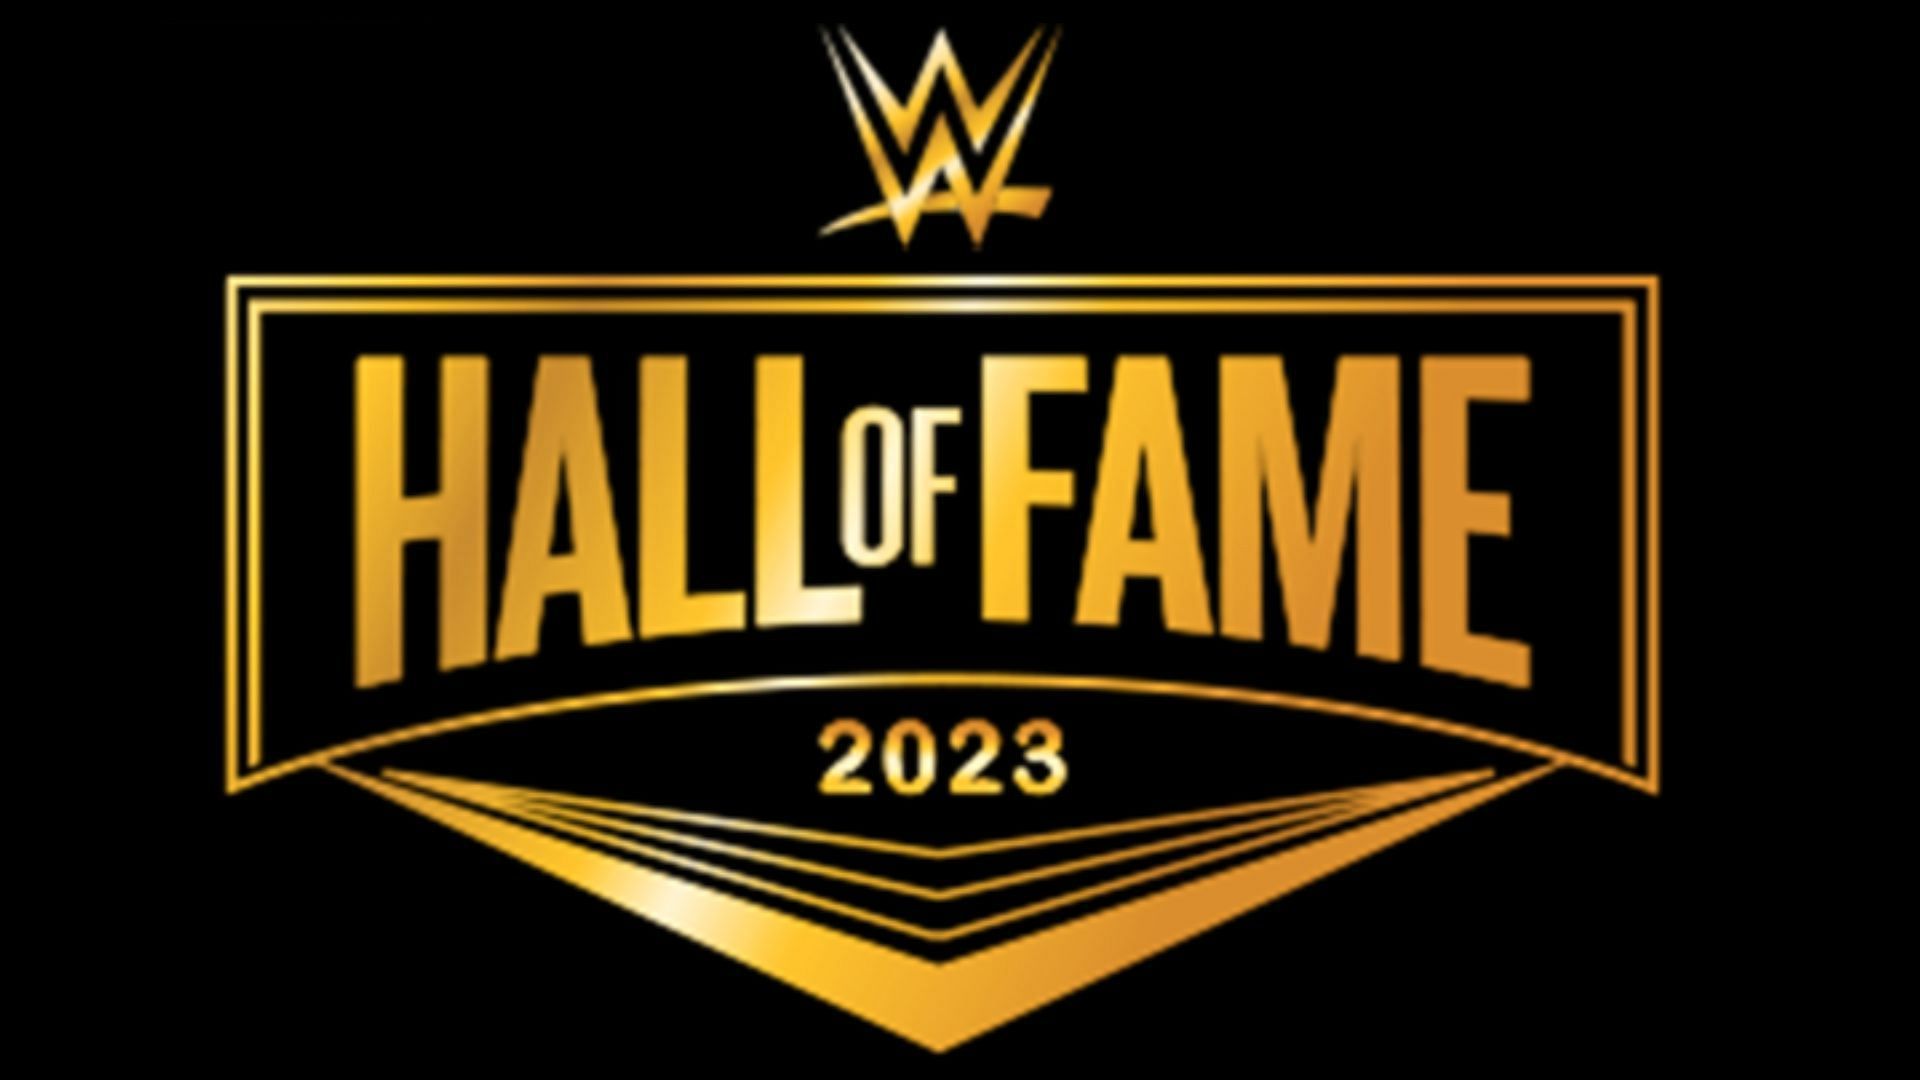 WWE Hall of Fame 2023 will take place on March 31st